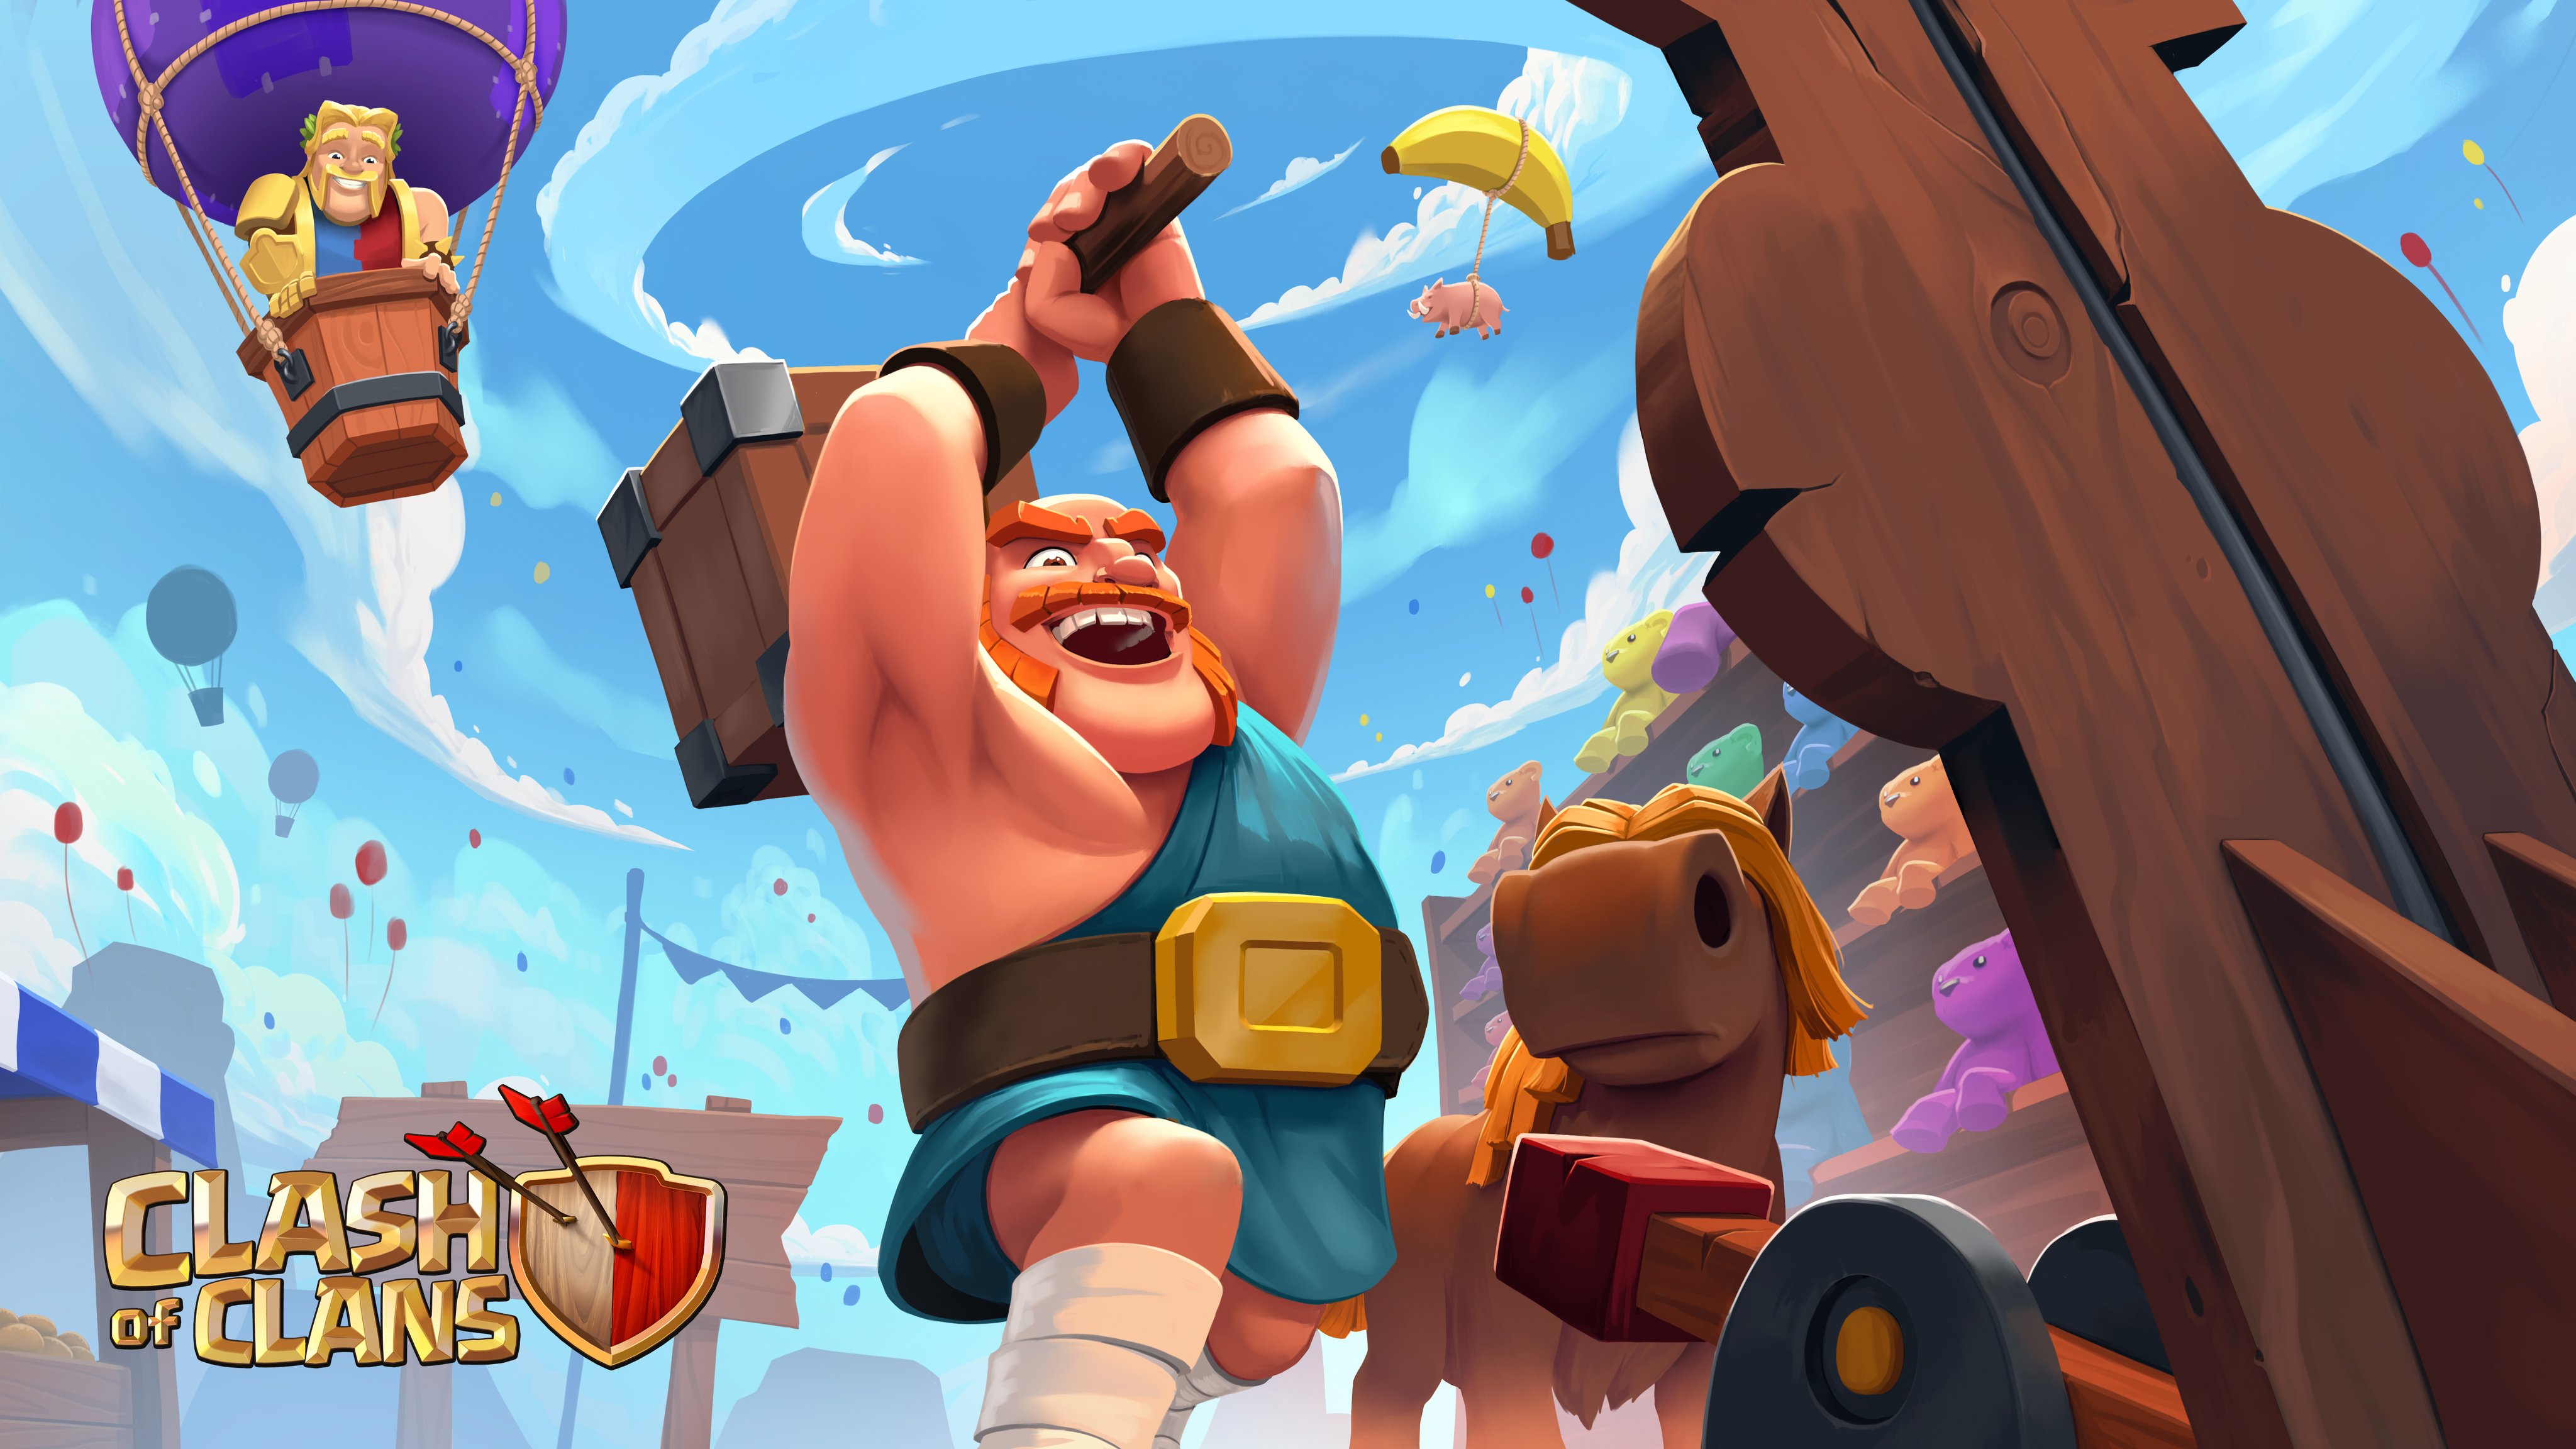 Clash of Clans brings back the Hammer Jam event 2022 ahead of the October update PC